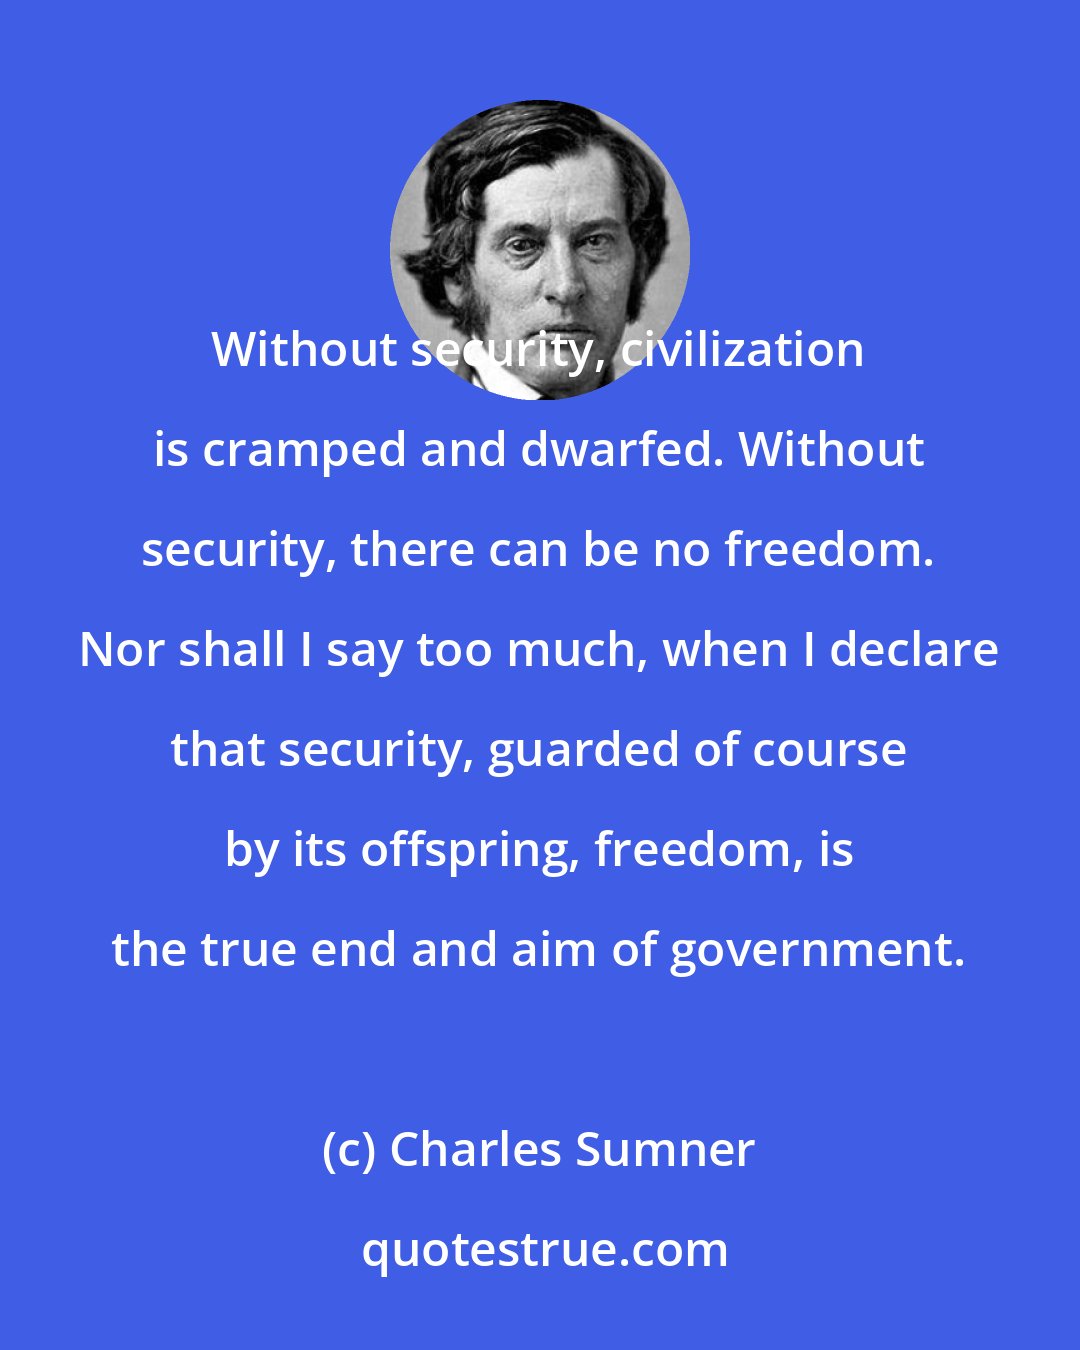 Charles Sumner: Without security, civilization is cramped and dwarfed. Without security, there can be no freedom. Nor shall I say too much, when I declare that security, guarded of course by its offspring, freedom, is the true end and aim of government.